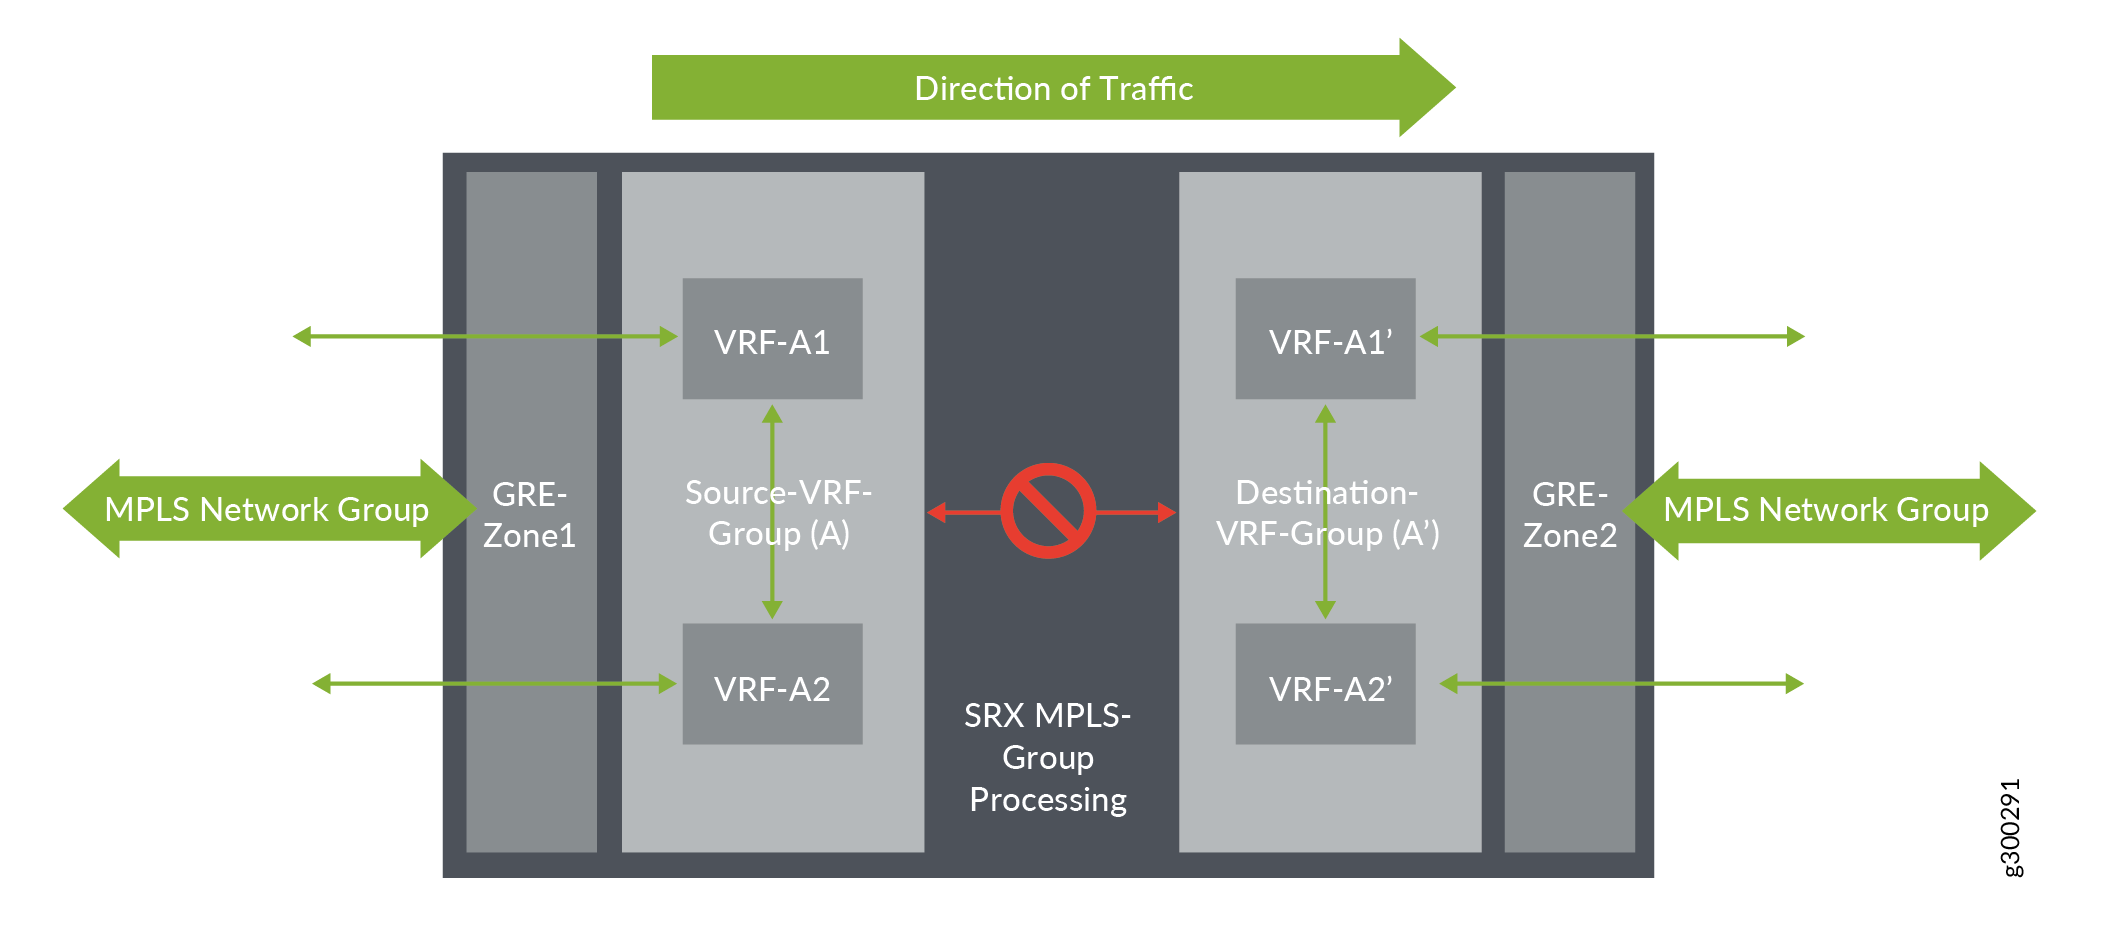 VRF Movement within VRF Group